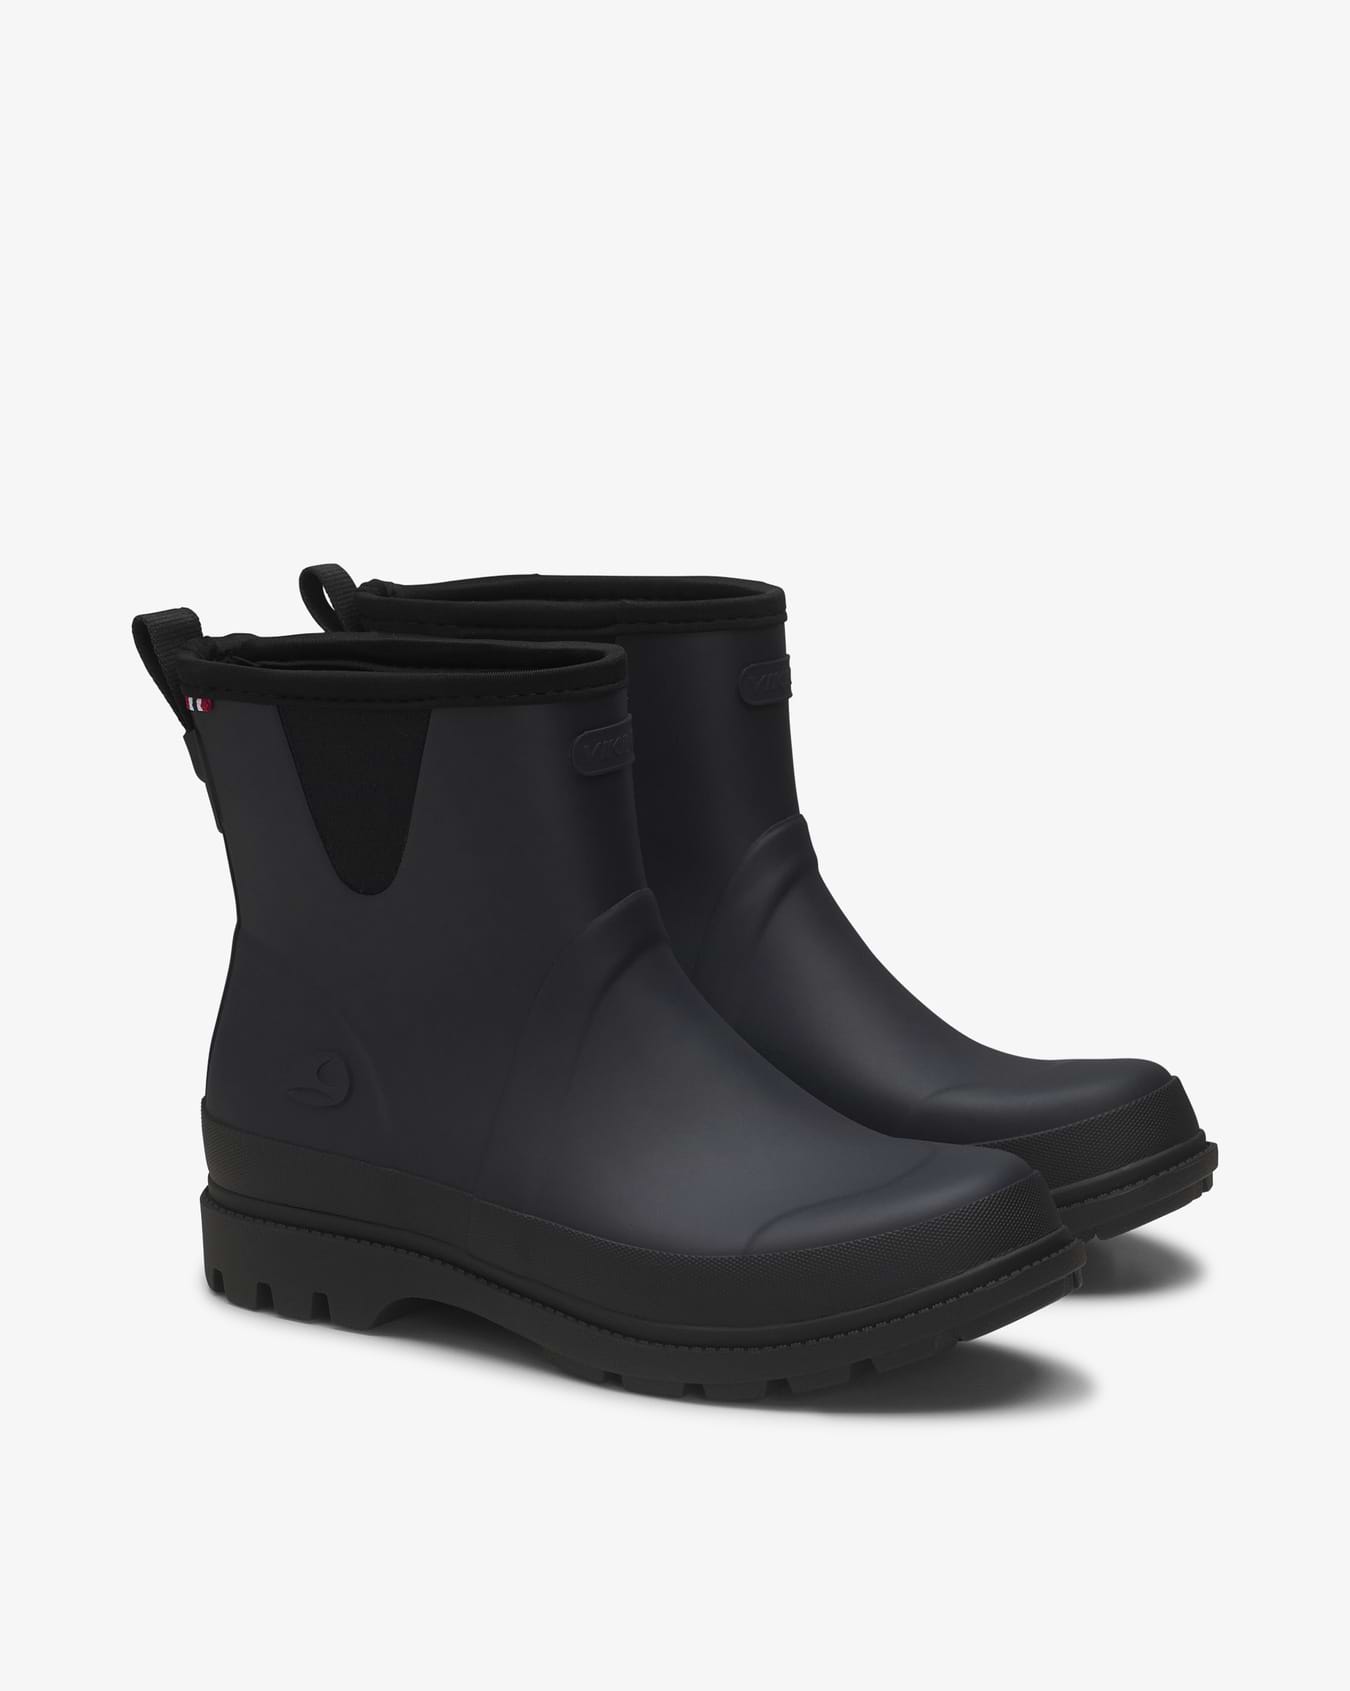 Noble Neo Navy/Black Rubber Boot